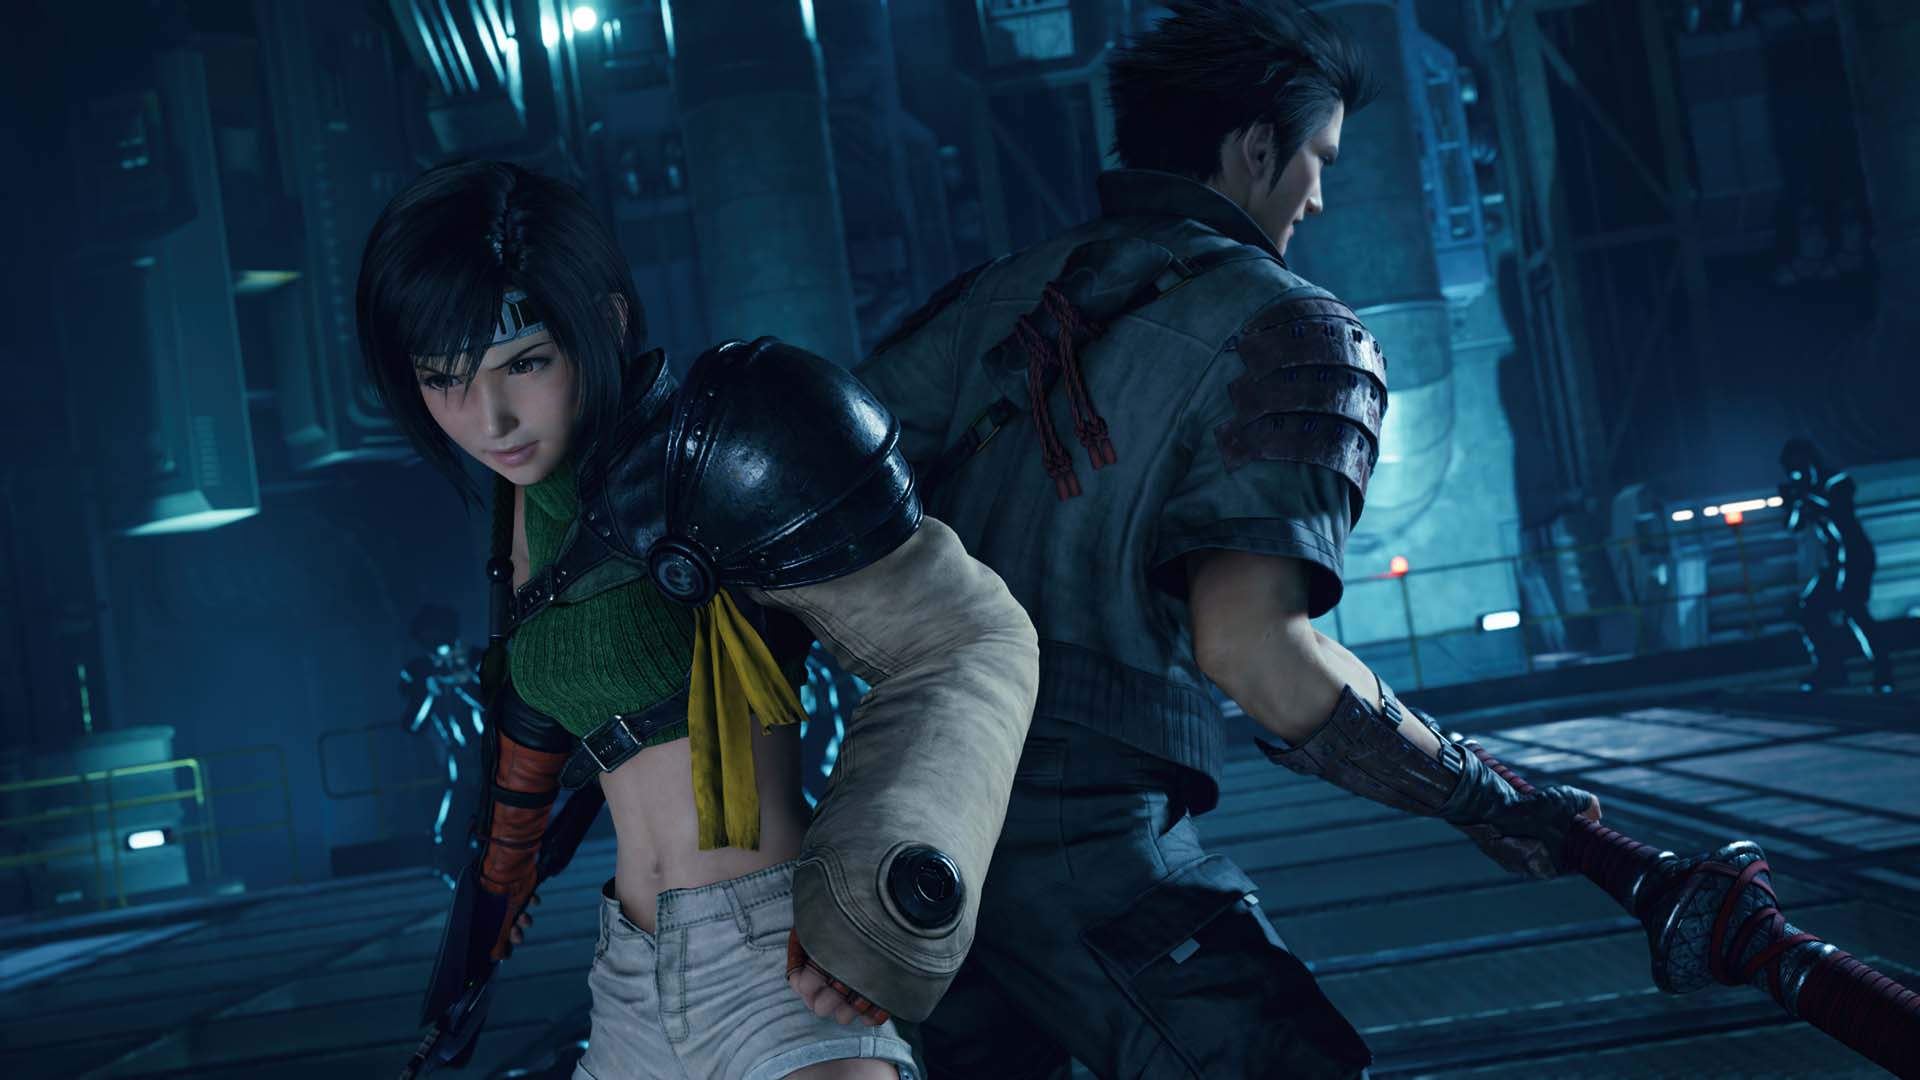 Final Fantasy VII Remake - EPISODE INTERmission (New Story Content Featuring Yuffie) DLC EU PS5 CD Key, 11.29$